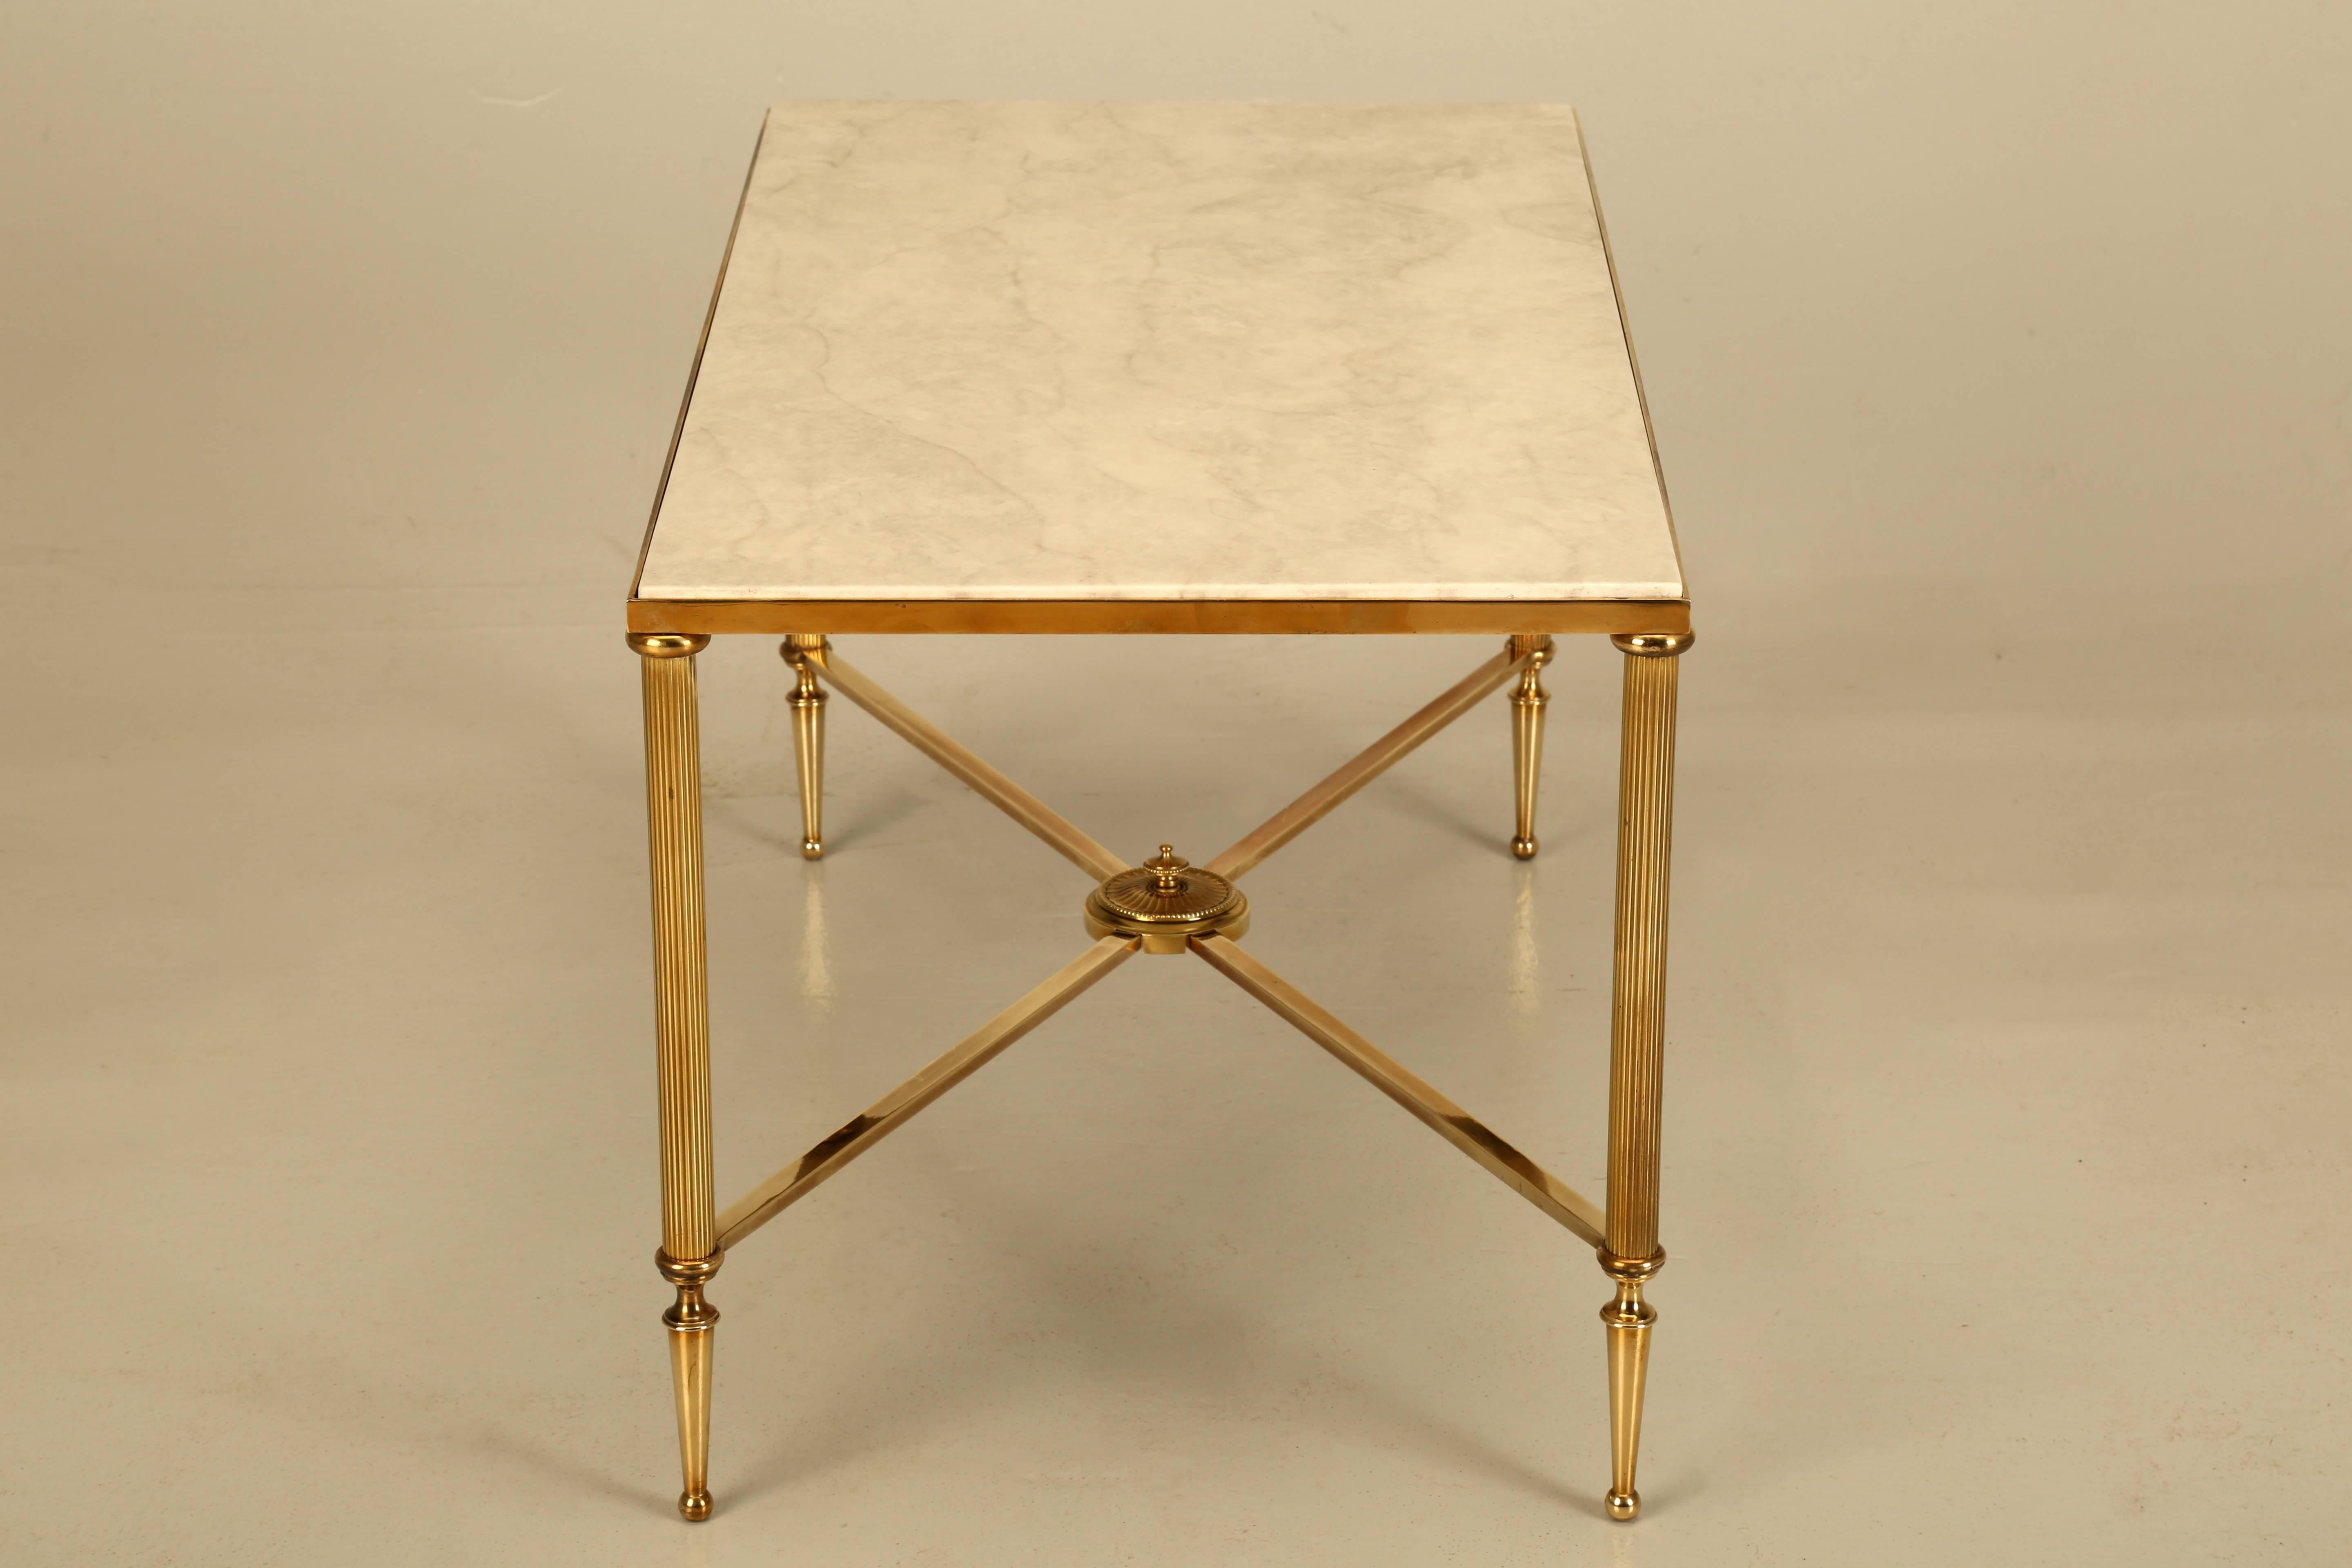 Mid-20th Century French Mid-Century Modern Coffee or Cocktail Table in Polished Solid Brass